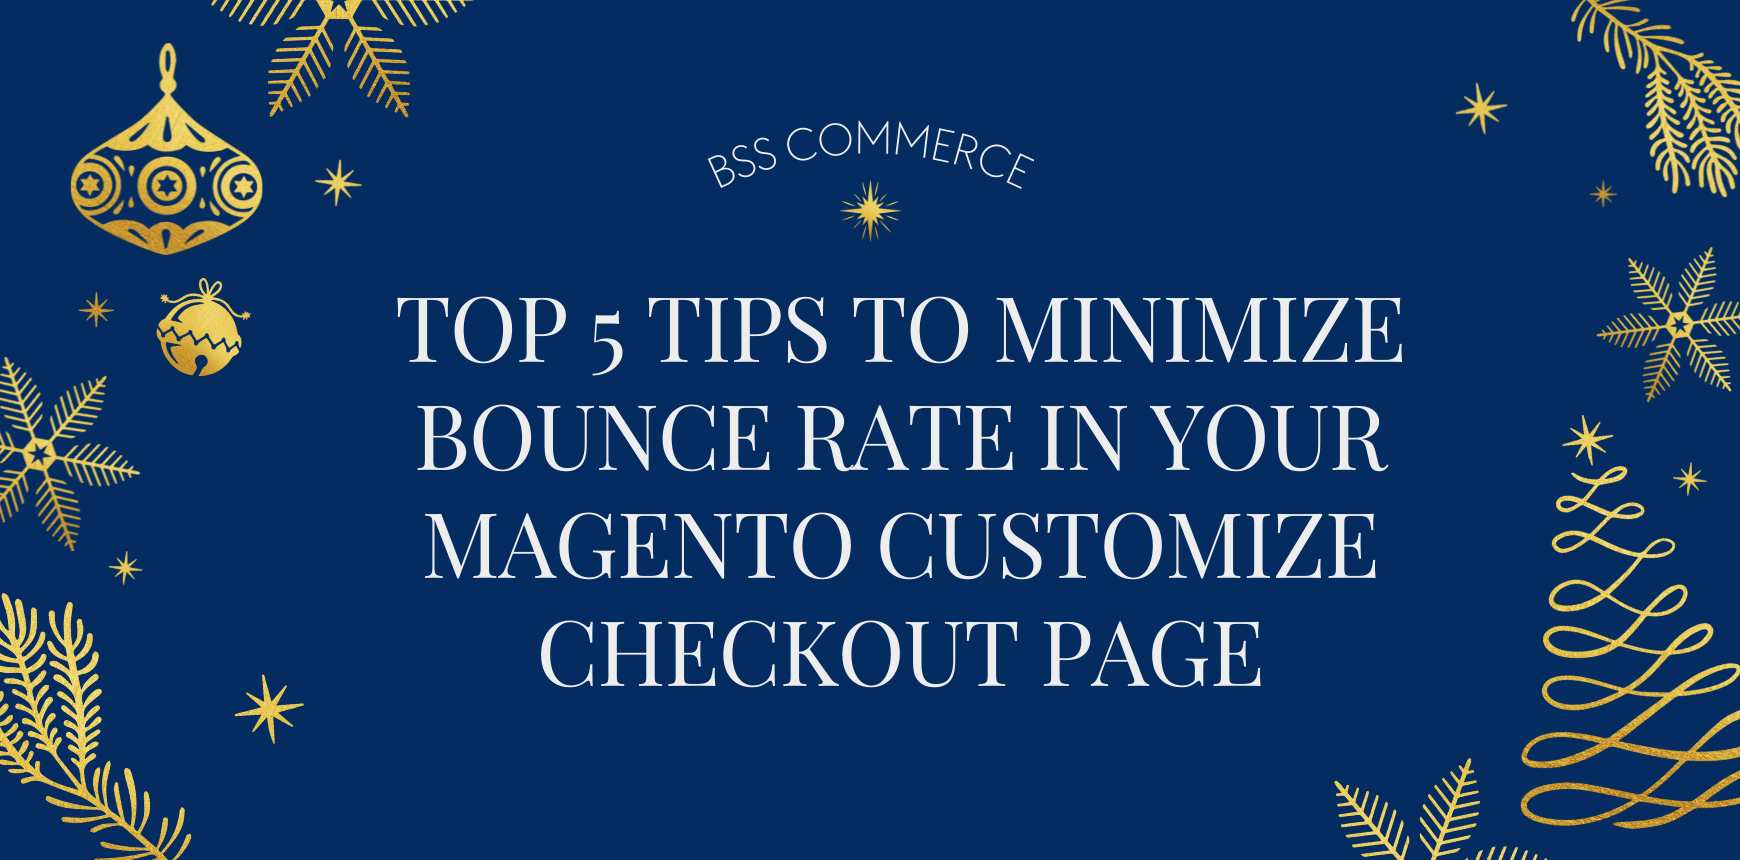 TOP 5 Tips To Minimize Bounce Rate in Your Magento Customize Checkout Page (1)